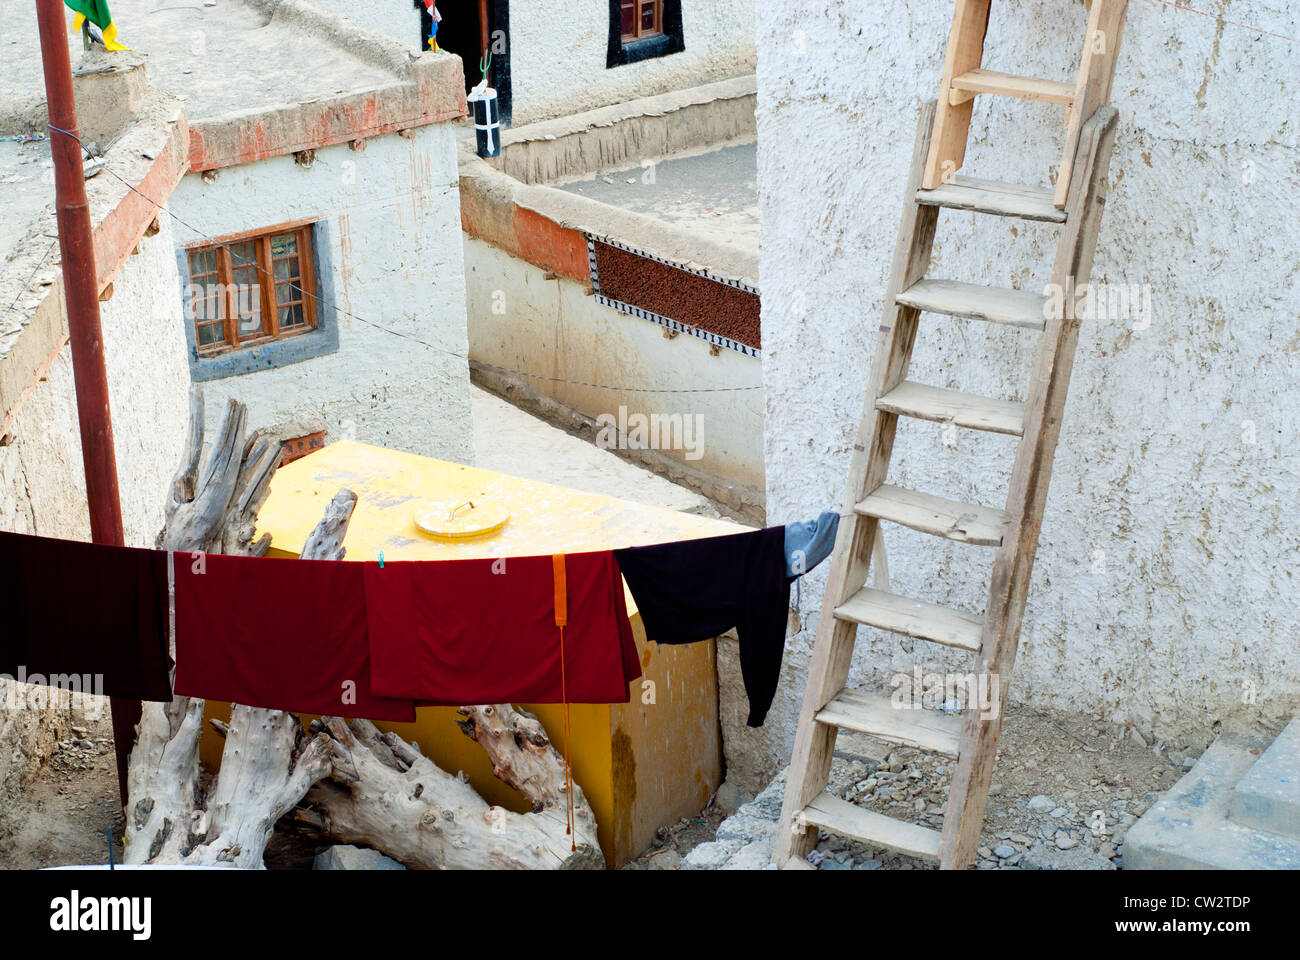 A detail of buildings and a courtyard at Lamayuru Monastery showing drying laundry and a ladder in Ladakh, India Stock Photo